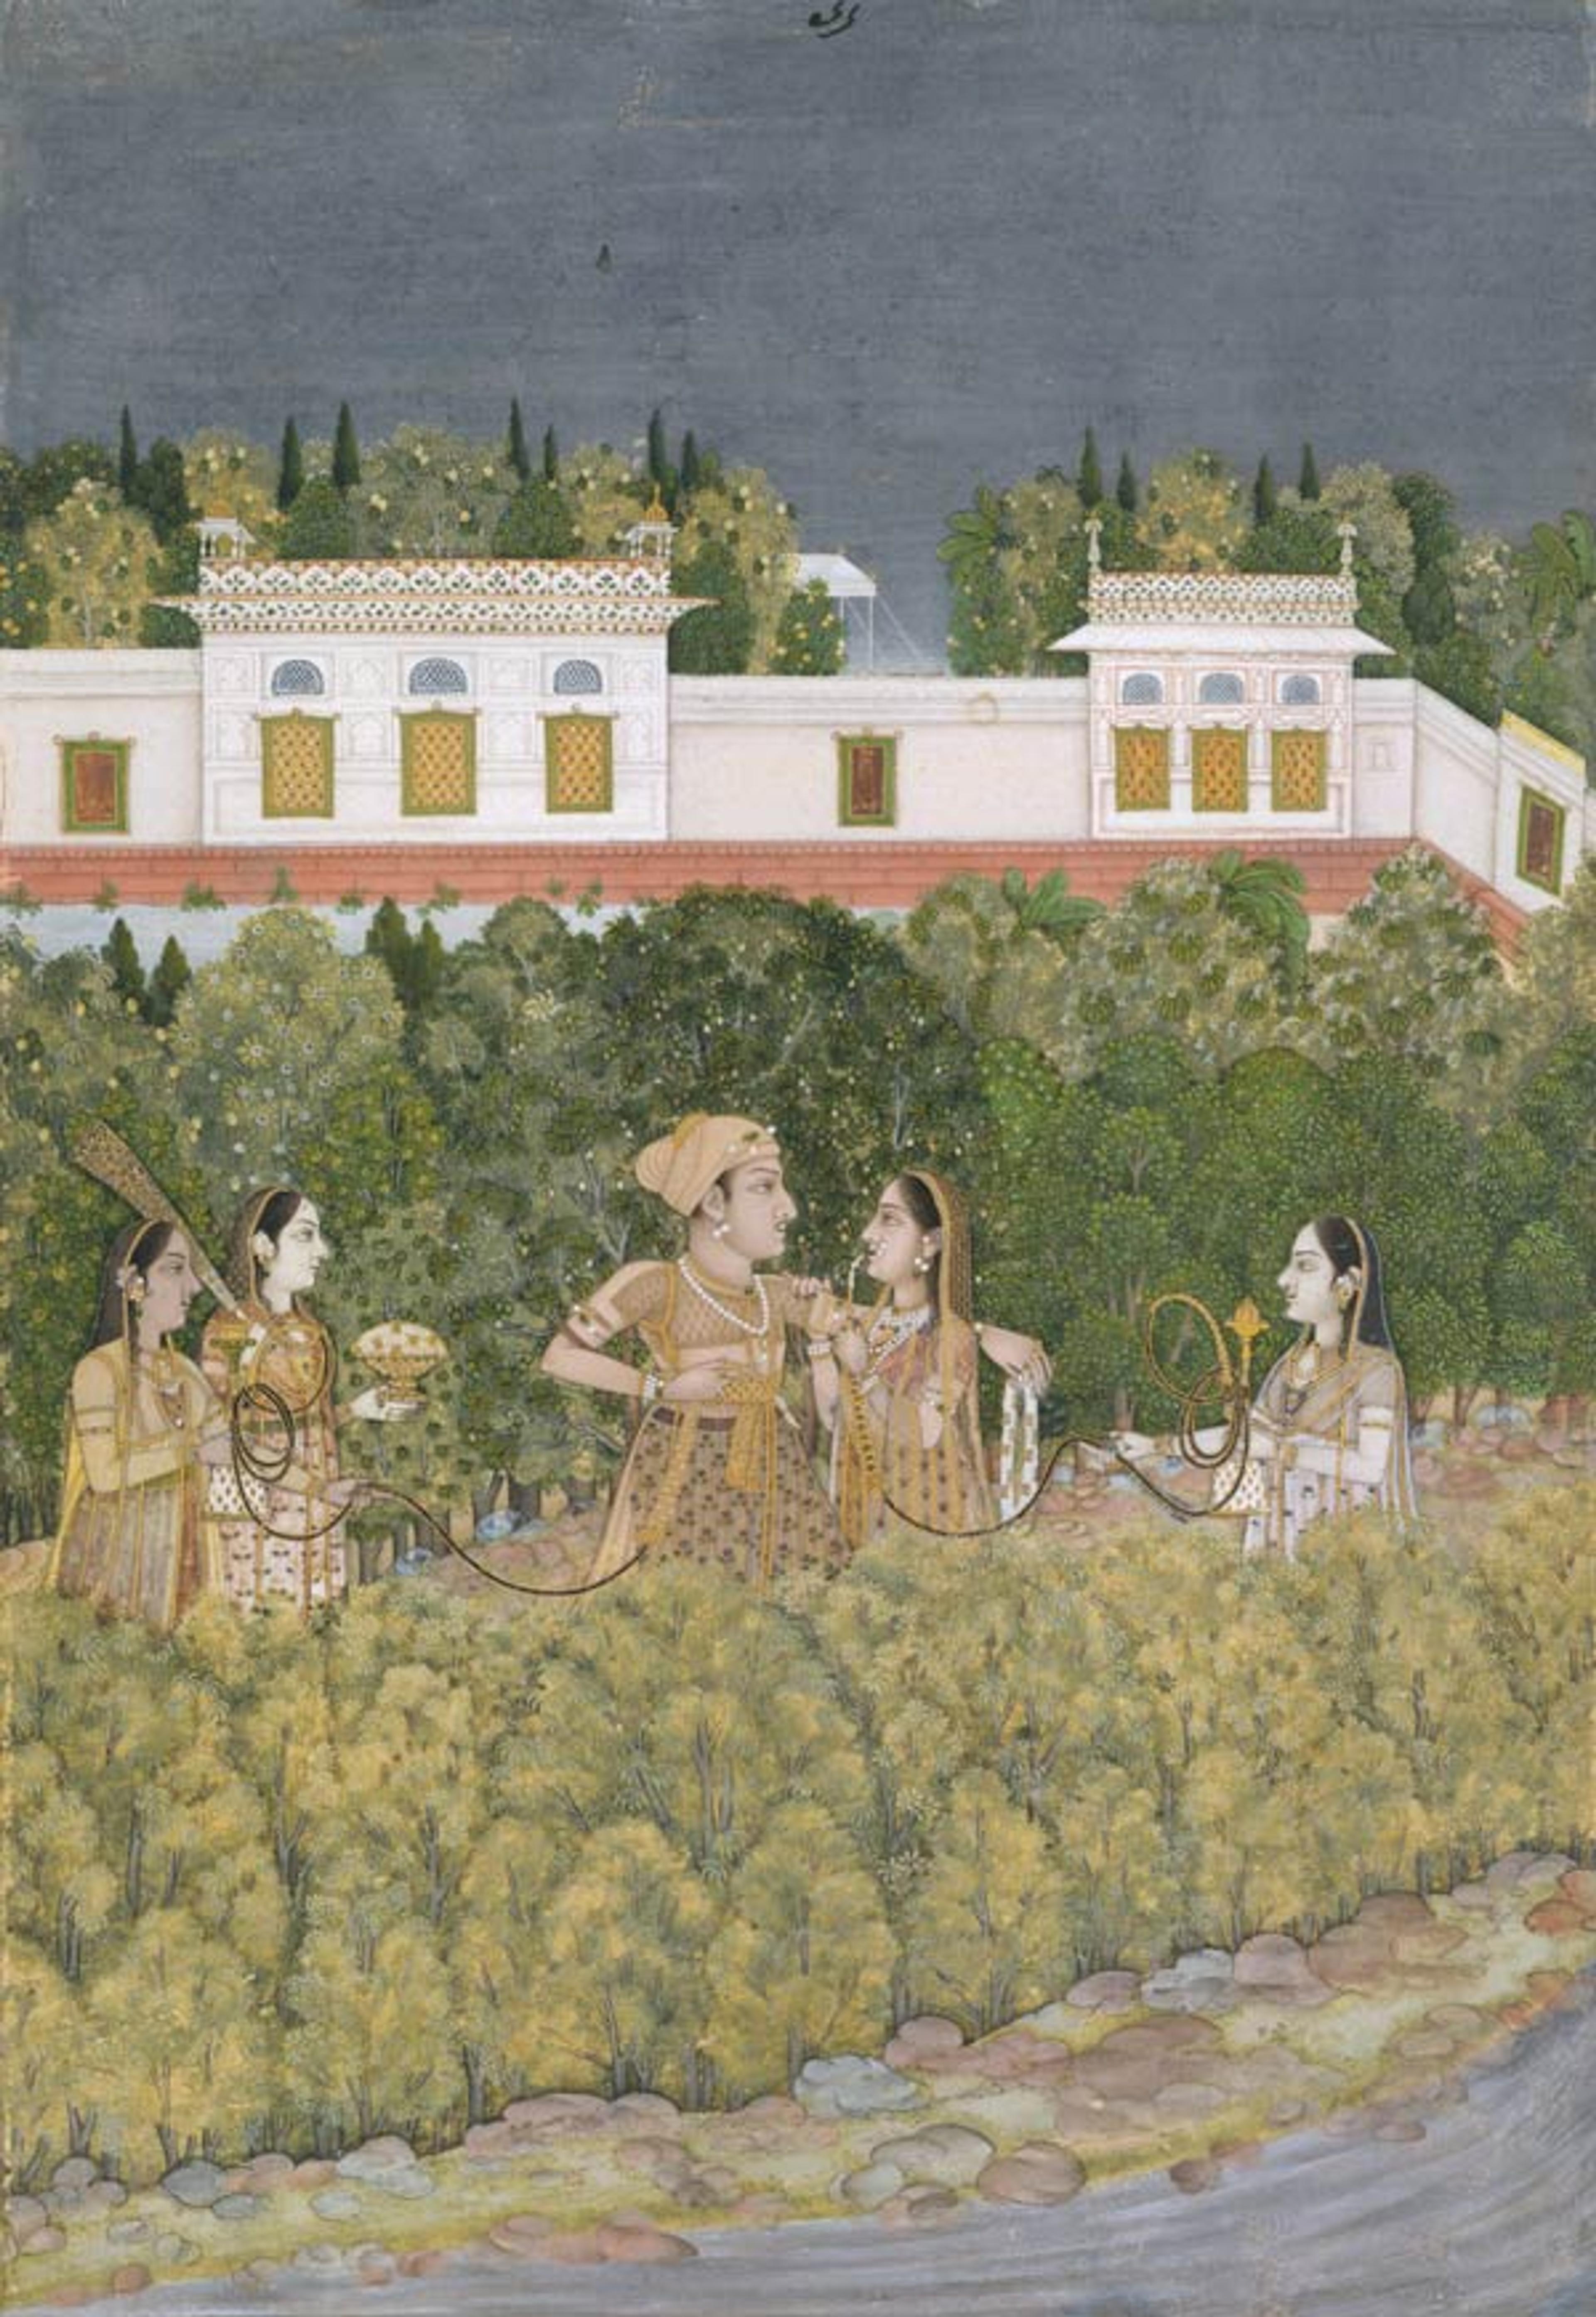 Nidha Mal. Prince and Ladies in a Garden, mid-18th century. Lucknow, India. Islamic. Ink, opaque watercolor, and gold on paper; 10 5/8 x 7 3/8 in. (27 x 18.7 cm). The Metropolitan Museum of Art, New York, Cynthia Hazen Polsky and Leon B. Polsky Fund, 2001 (2001.302)